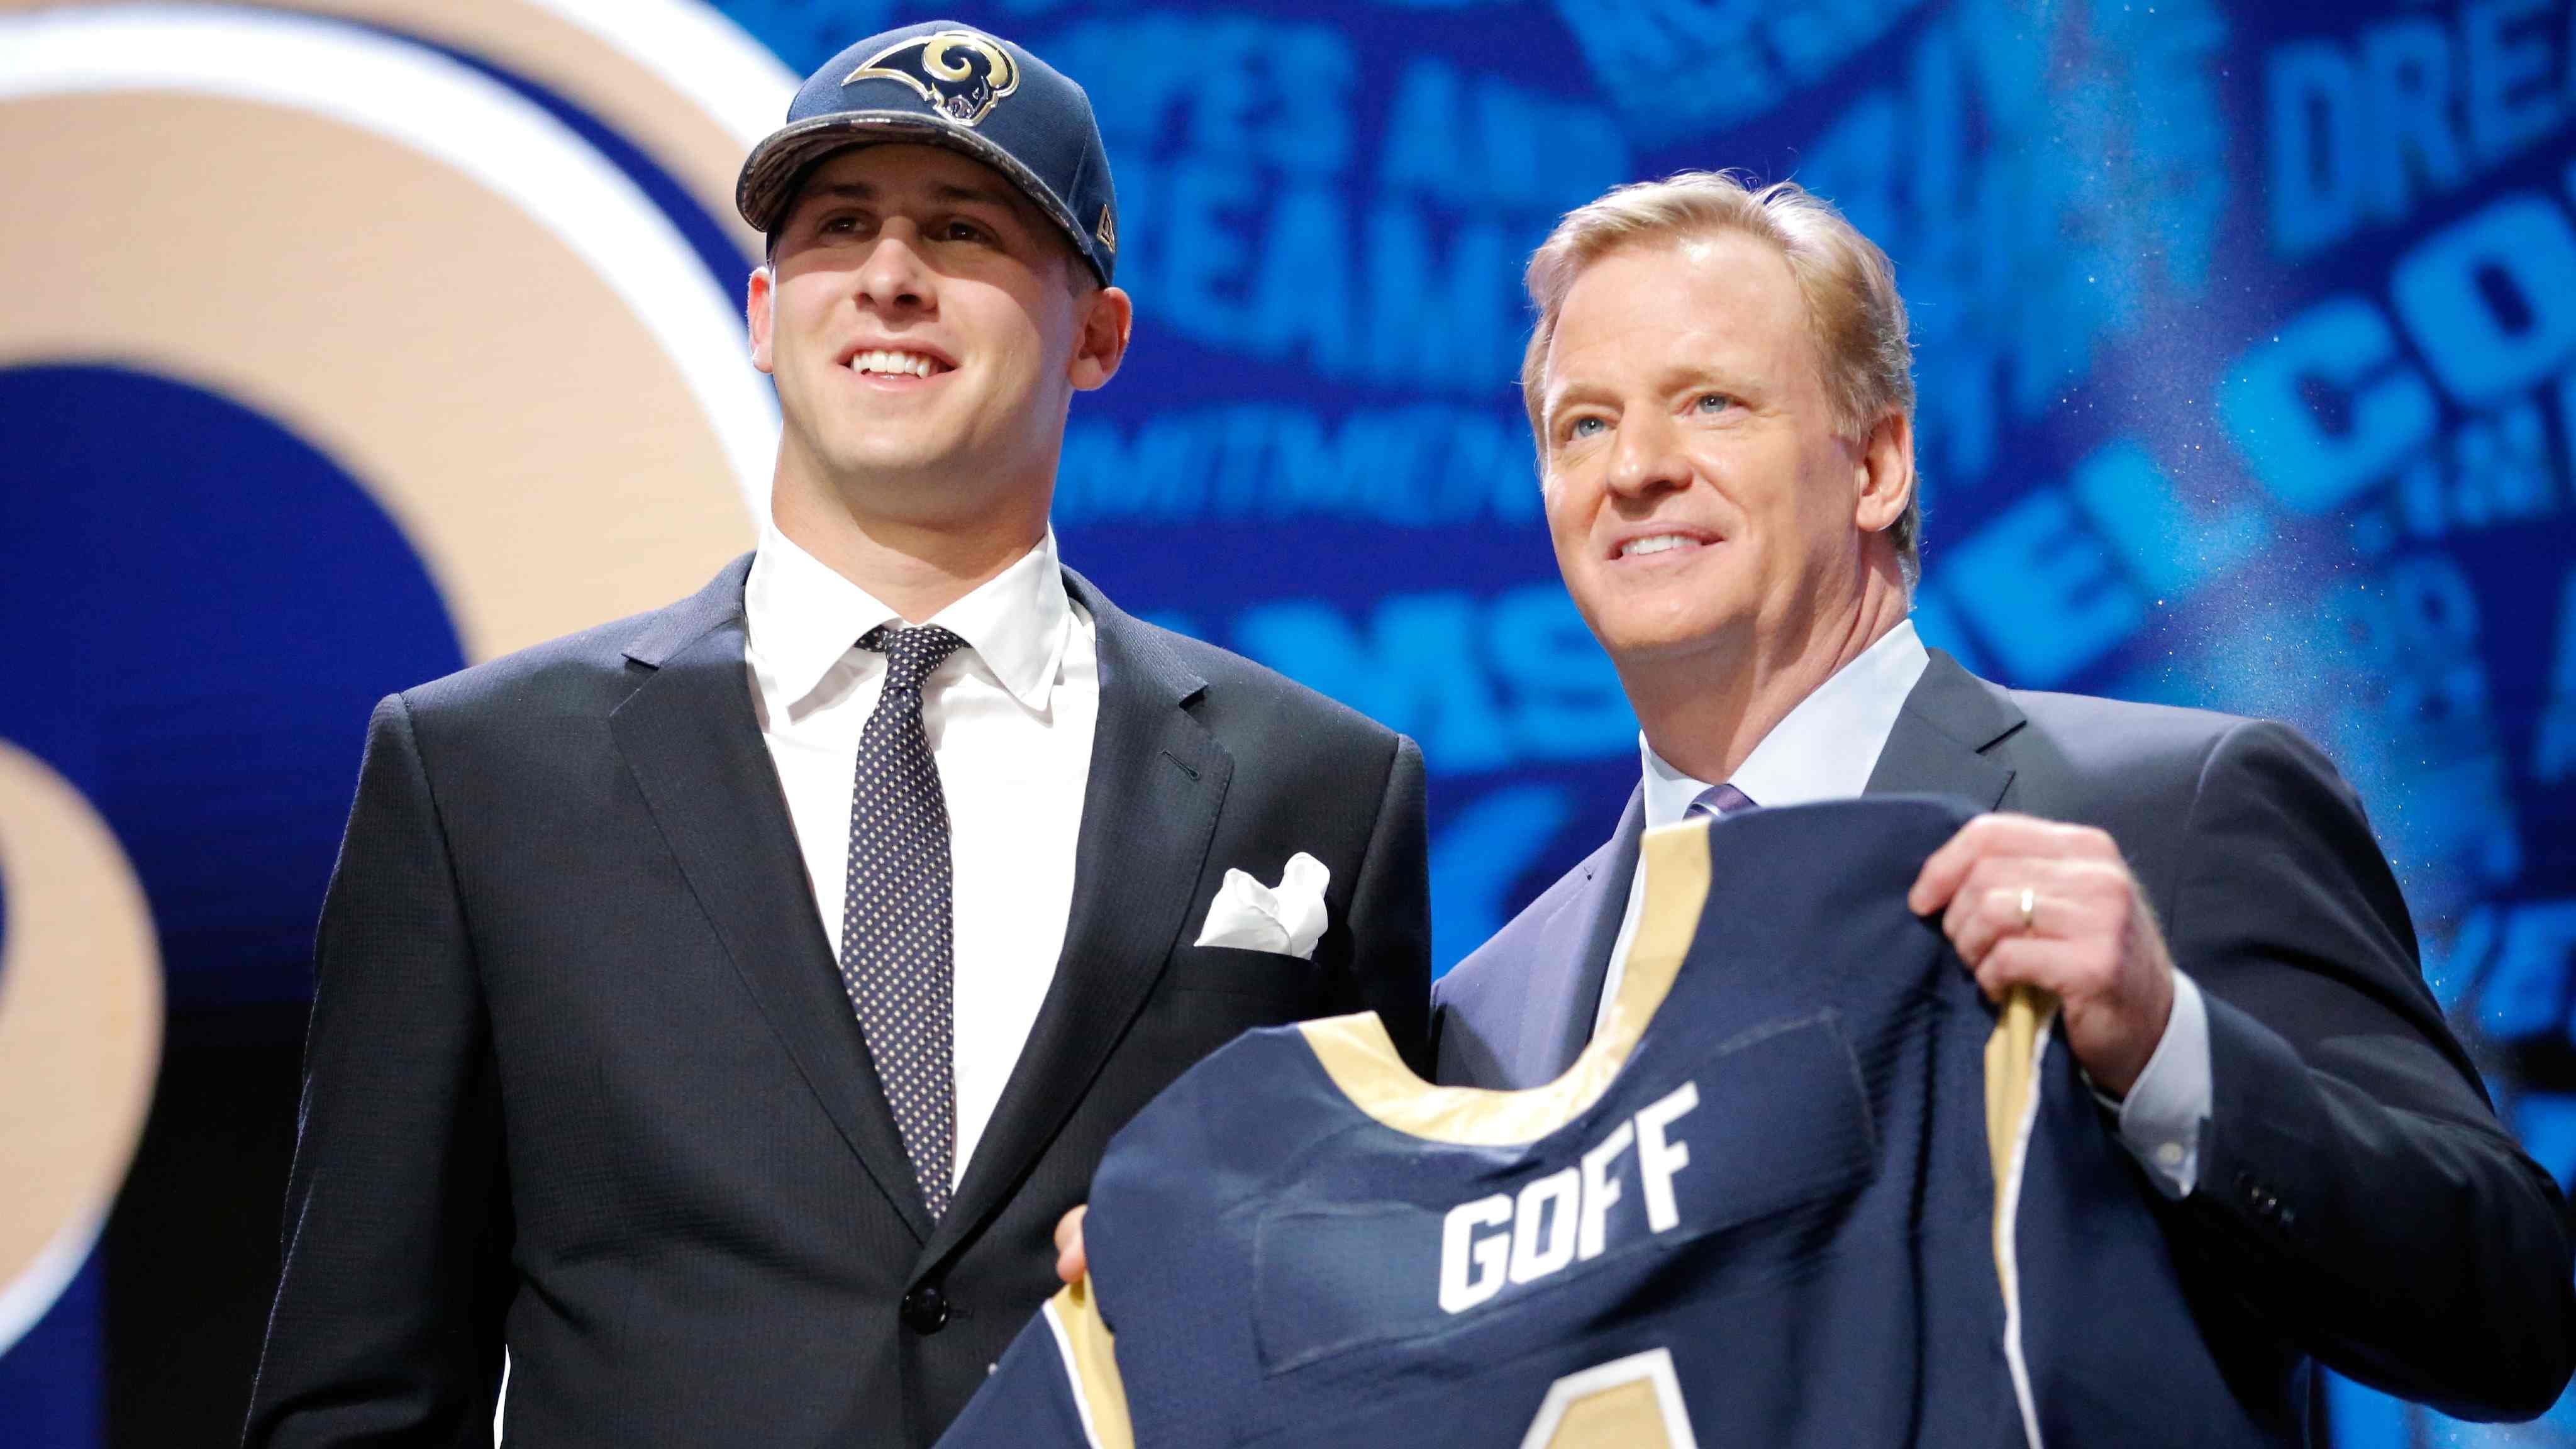 
                <strong>Jared Goff </strong><br>
                 - Draft: 2016 an 1. Stelle von den Los Angeles Rams  - Stationen: Los Angeles Rams 2016 bis 2020 - Aktuell: Detroit Lions seit 2021 
              